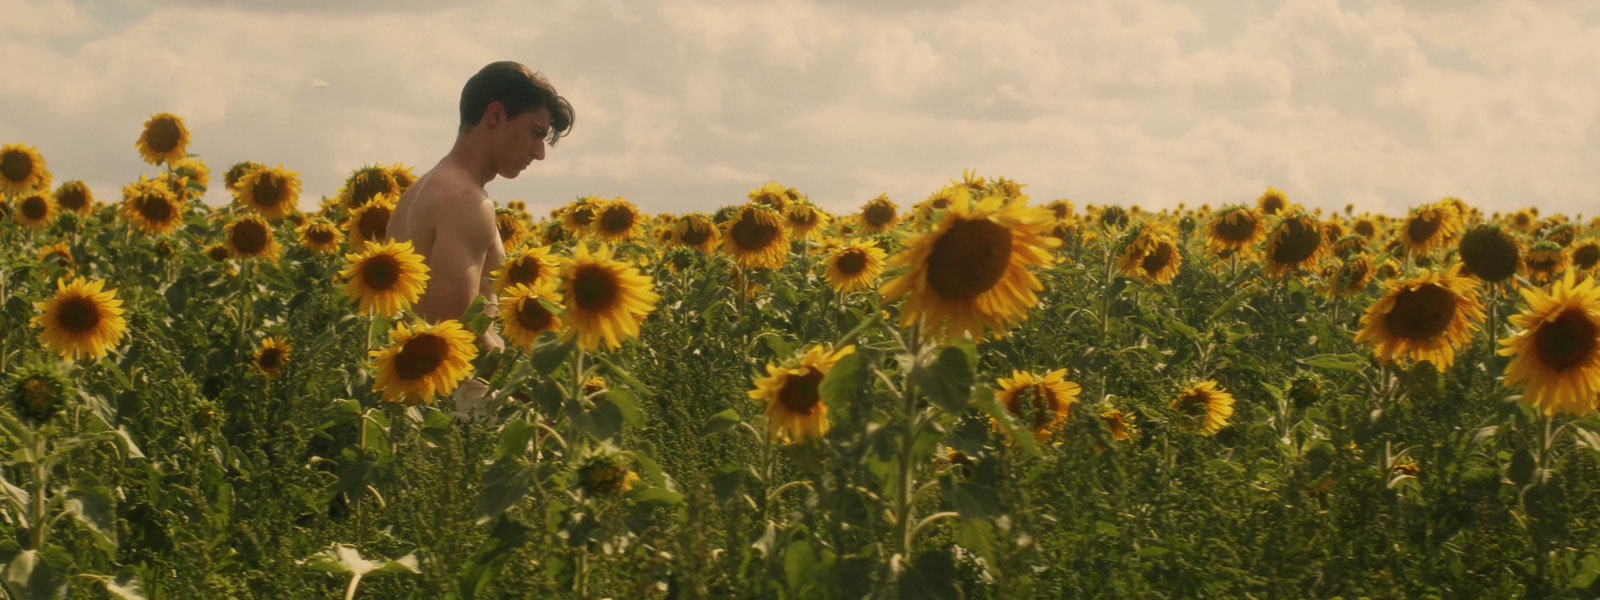 Image from 'Sunflower'